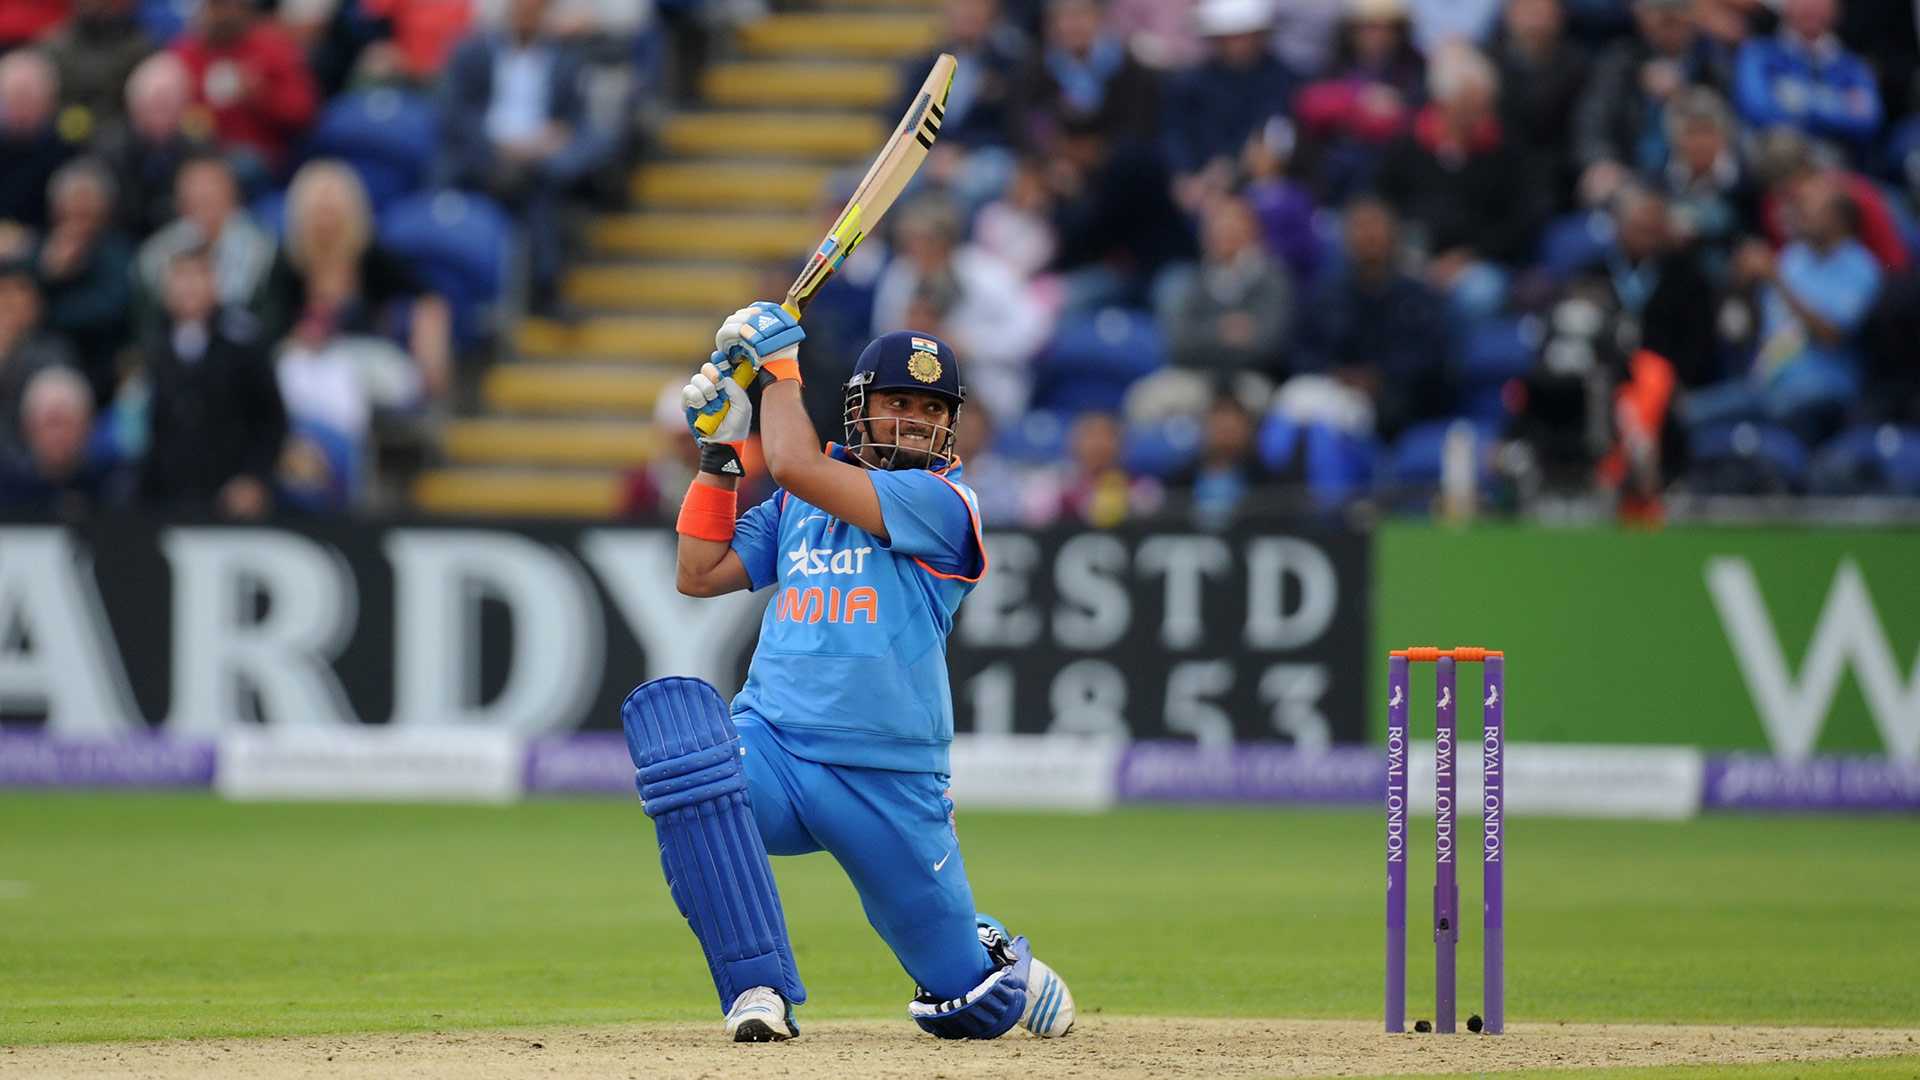 Suresh Raina, the eternal supporting actor, who followed MS Dhoni in retirement